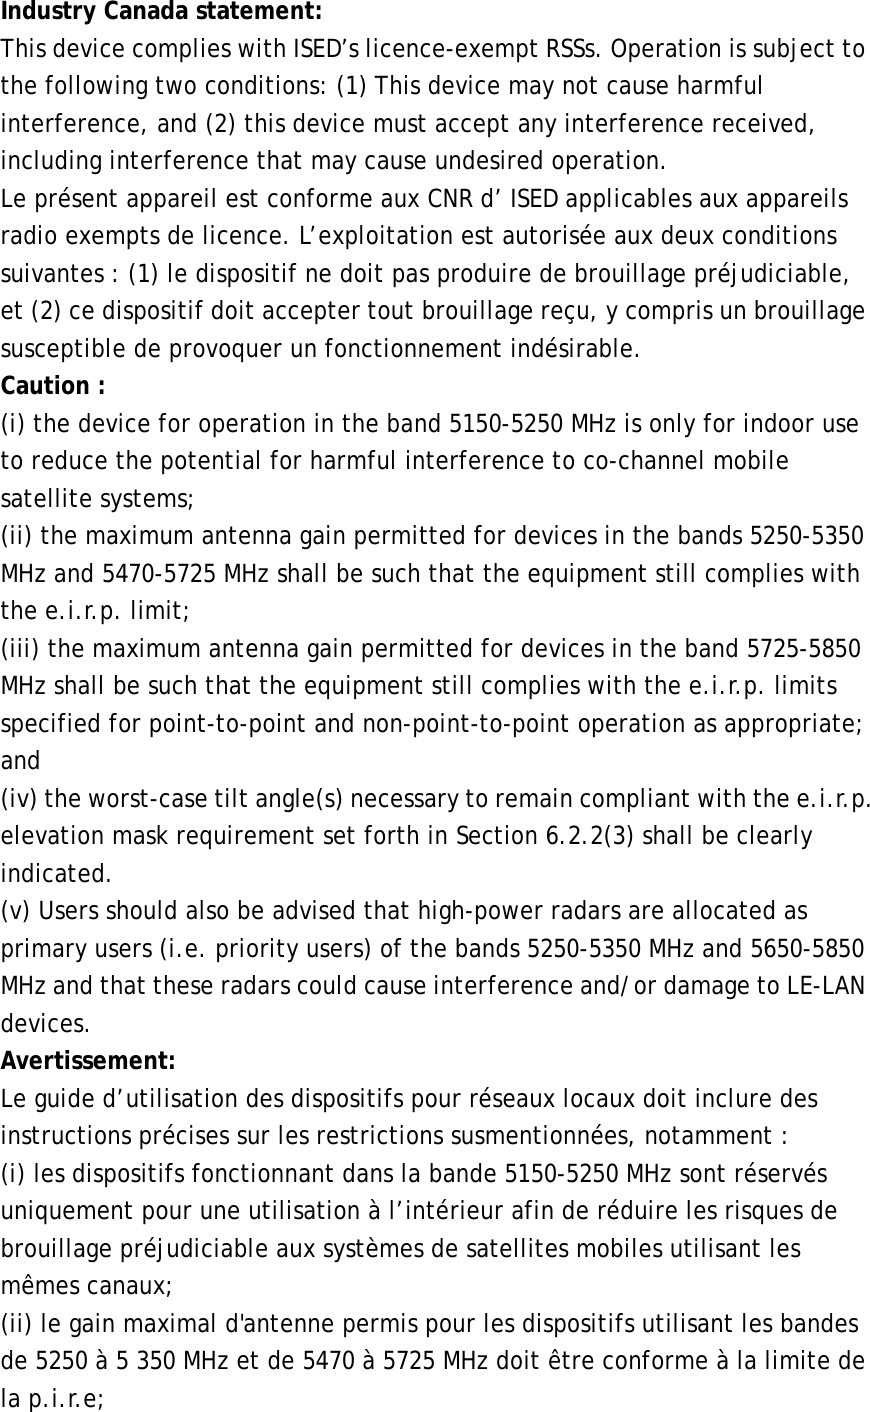 Industry Canada statement: This device complies with ISED’s licence-exempt RSSs. Operation is subject to the following two conditions: (1) This device may not cause harmful interference, and (2) this device must accept any interference received, including interference that may cause undesired operation. Le présent appareil est conforme aux CNR d’ ISED applicables aux appareils radio exempts de licence. L’exploitation est autorisée aux deux conditions suivantes : (1) le dispositif ne doit pas produire de brouillage préjudiciable, et (2) ce dispositif doit accepter tout brouillage reçu, y compris un brouillage susceptible de provoquer un fonctionnement indésirable.  Caution : (i) the device for operation in the band 5150-5250 MHz is only for indoor use to reduce the potential for harmful interference to co-channel mobile satellite systems; (ii) the maximum antenna gain permitted for devices in the bands 5250-5350 MHz and 5470-5725 MHz shall be such that the equipment still complies with the e.i.r.p. limit;  (iii) the maximum antenna gain permitted for devices in the band 5725-5850 MHz shall be such that the equipment still complies with the e.i.r.p. limits specified for point-to-point and non-point-to-point operation as appropriate; and  (iv) the worst-case tilt angle(s) necessary to remain compliant with the e.i.r.p. elevation mask requirement set forth in Section 6.2.2(3) shall be clearly indicated.  (v) Users should also be advised that high-power radars are allocated as primary users (i.e. priority users) of the bands 5250-5350 MHz and 5650-5850 MHz and that these radars could cause interference and/or damage to LE-LAN devices. Avertissement: Le guide d’utilisation des dispositifs pour réseaux locaux doit inclure des instructions précises sur les restrictions susmentionnées, notamment : (i) les dispositifs fonctionnant dans la bande 5150-5250 MHz sont réservés uniquement pour une utilisation à l’intérieur afin de réduire les risques de brouillage préjudiciable aux systèmes de satellites mobiles utilisant les mêmes canaux; (ii) le gain maximal d&apos;antenne permis pour les dispositifs utilisant les bandes de 5250 à 5 350 MHz et de 5470 à 5725 MHz doit être conforme à la limite de la p.i.r.e;  